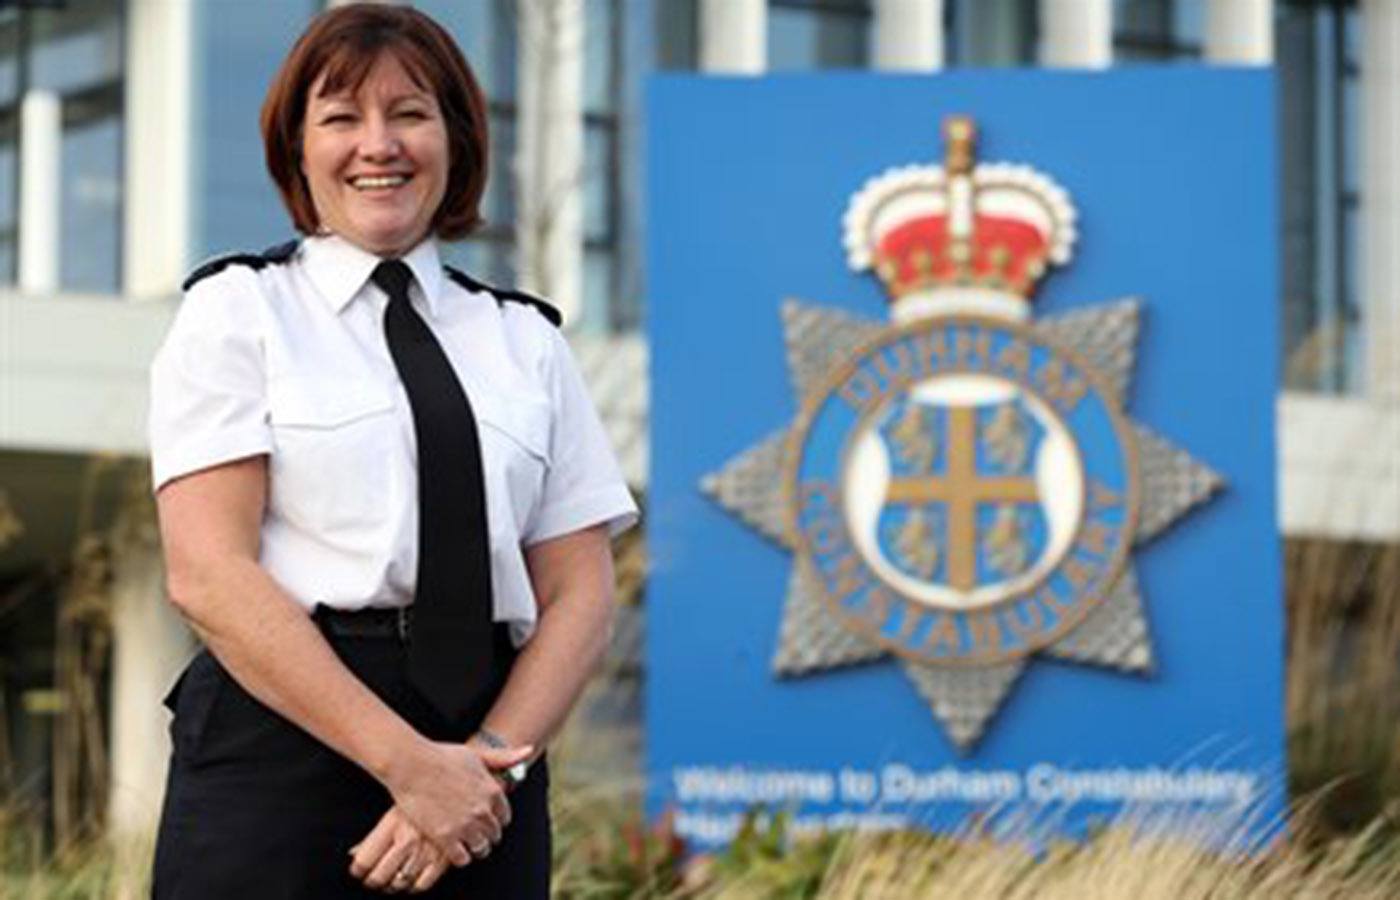 Chief constable Jo Farrell will take up post on October 9 - becoming the force's first female chief.